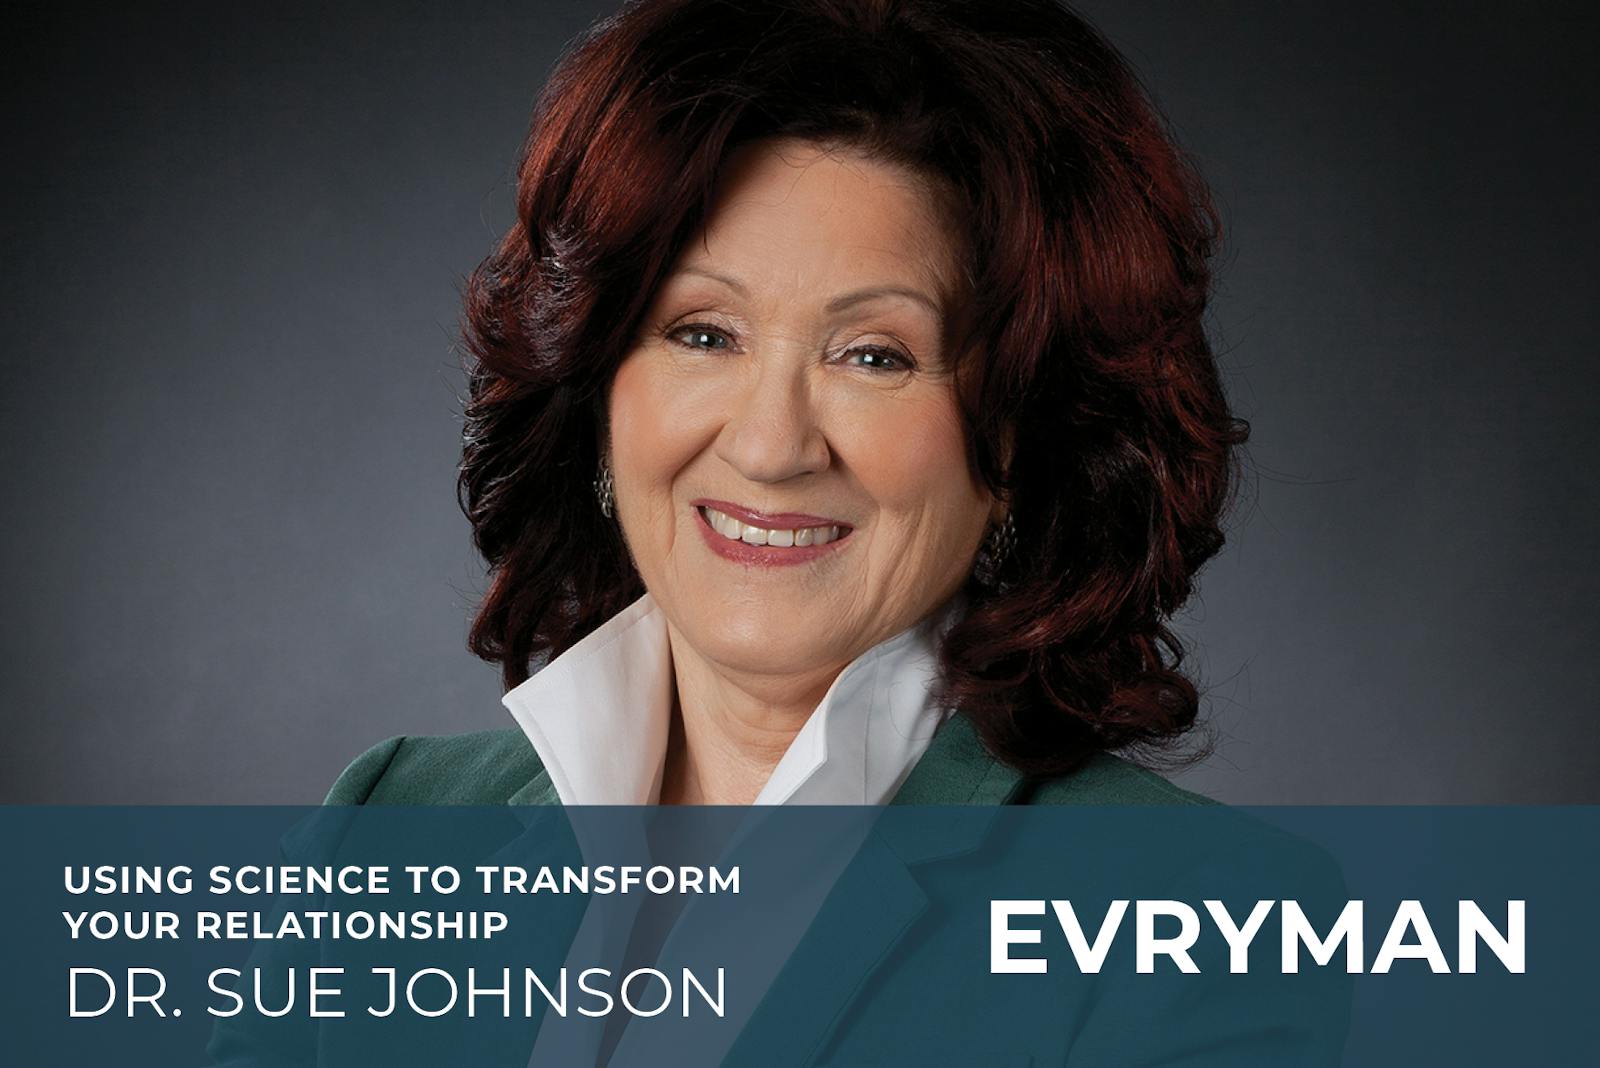 Using Science to Transform Your Relationship with special guest Sue Johnson